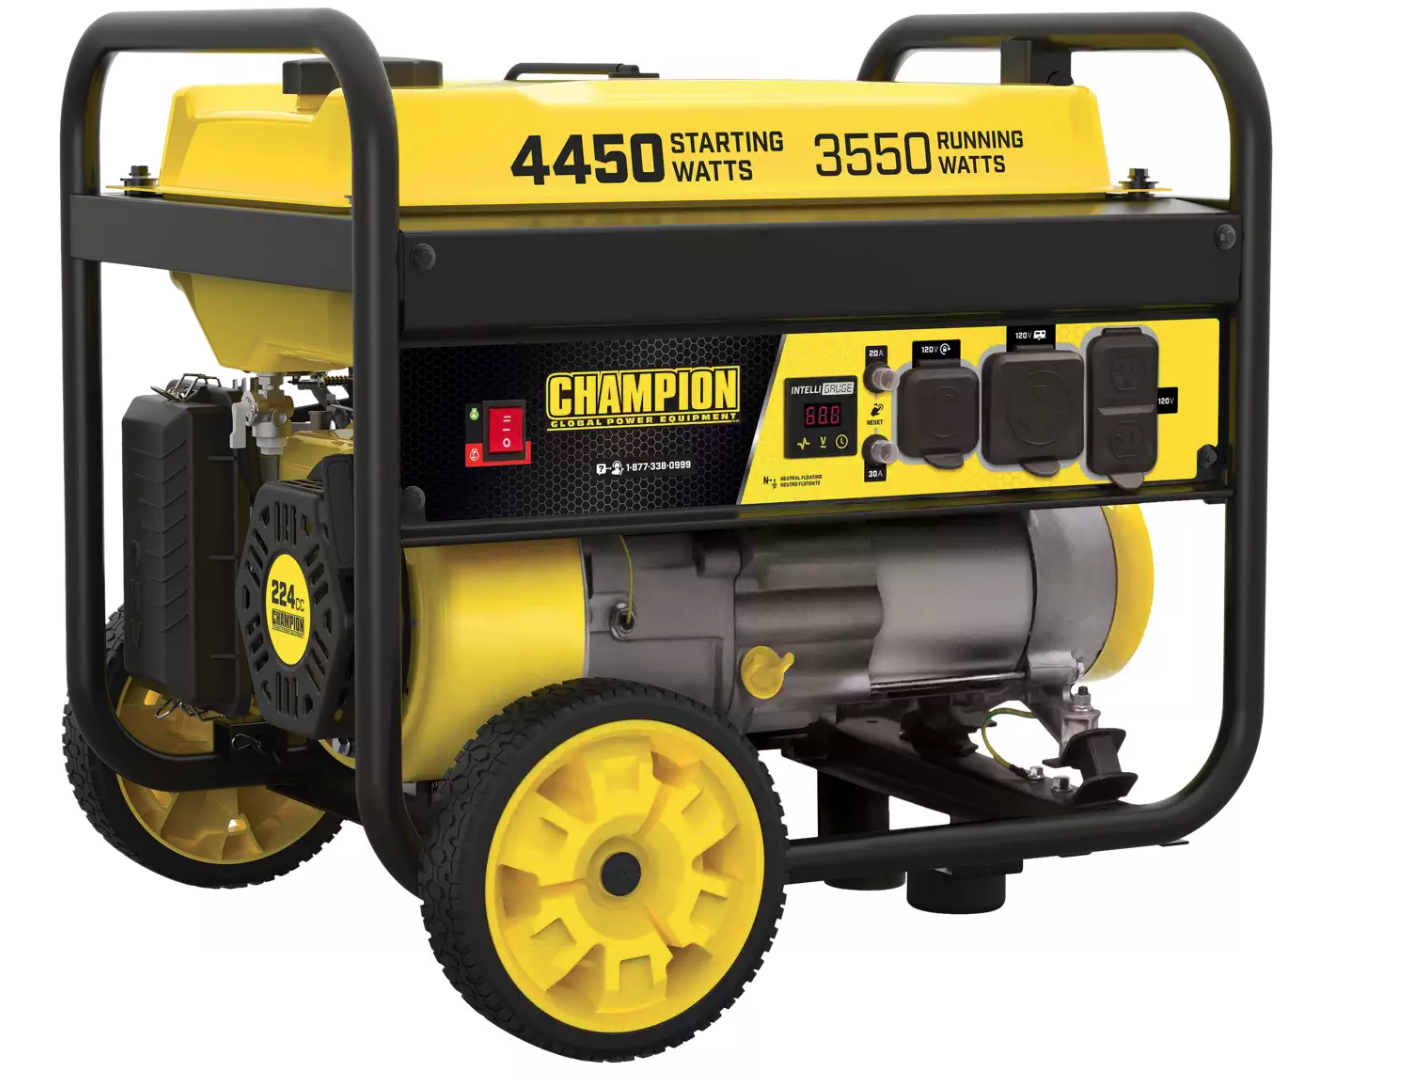 Champion Power Equipment 3550W Weekender Portable Generator - $339.97 (Free S/H over $50)